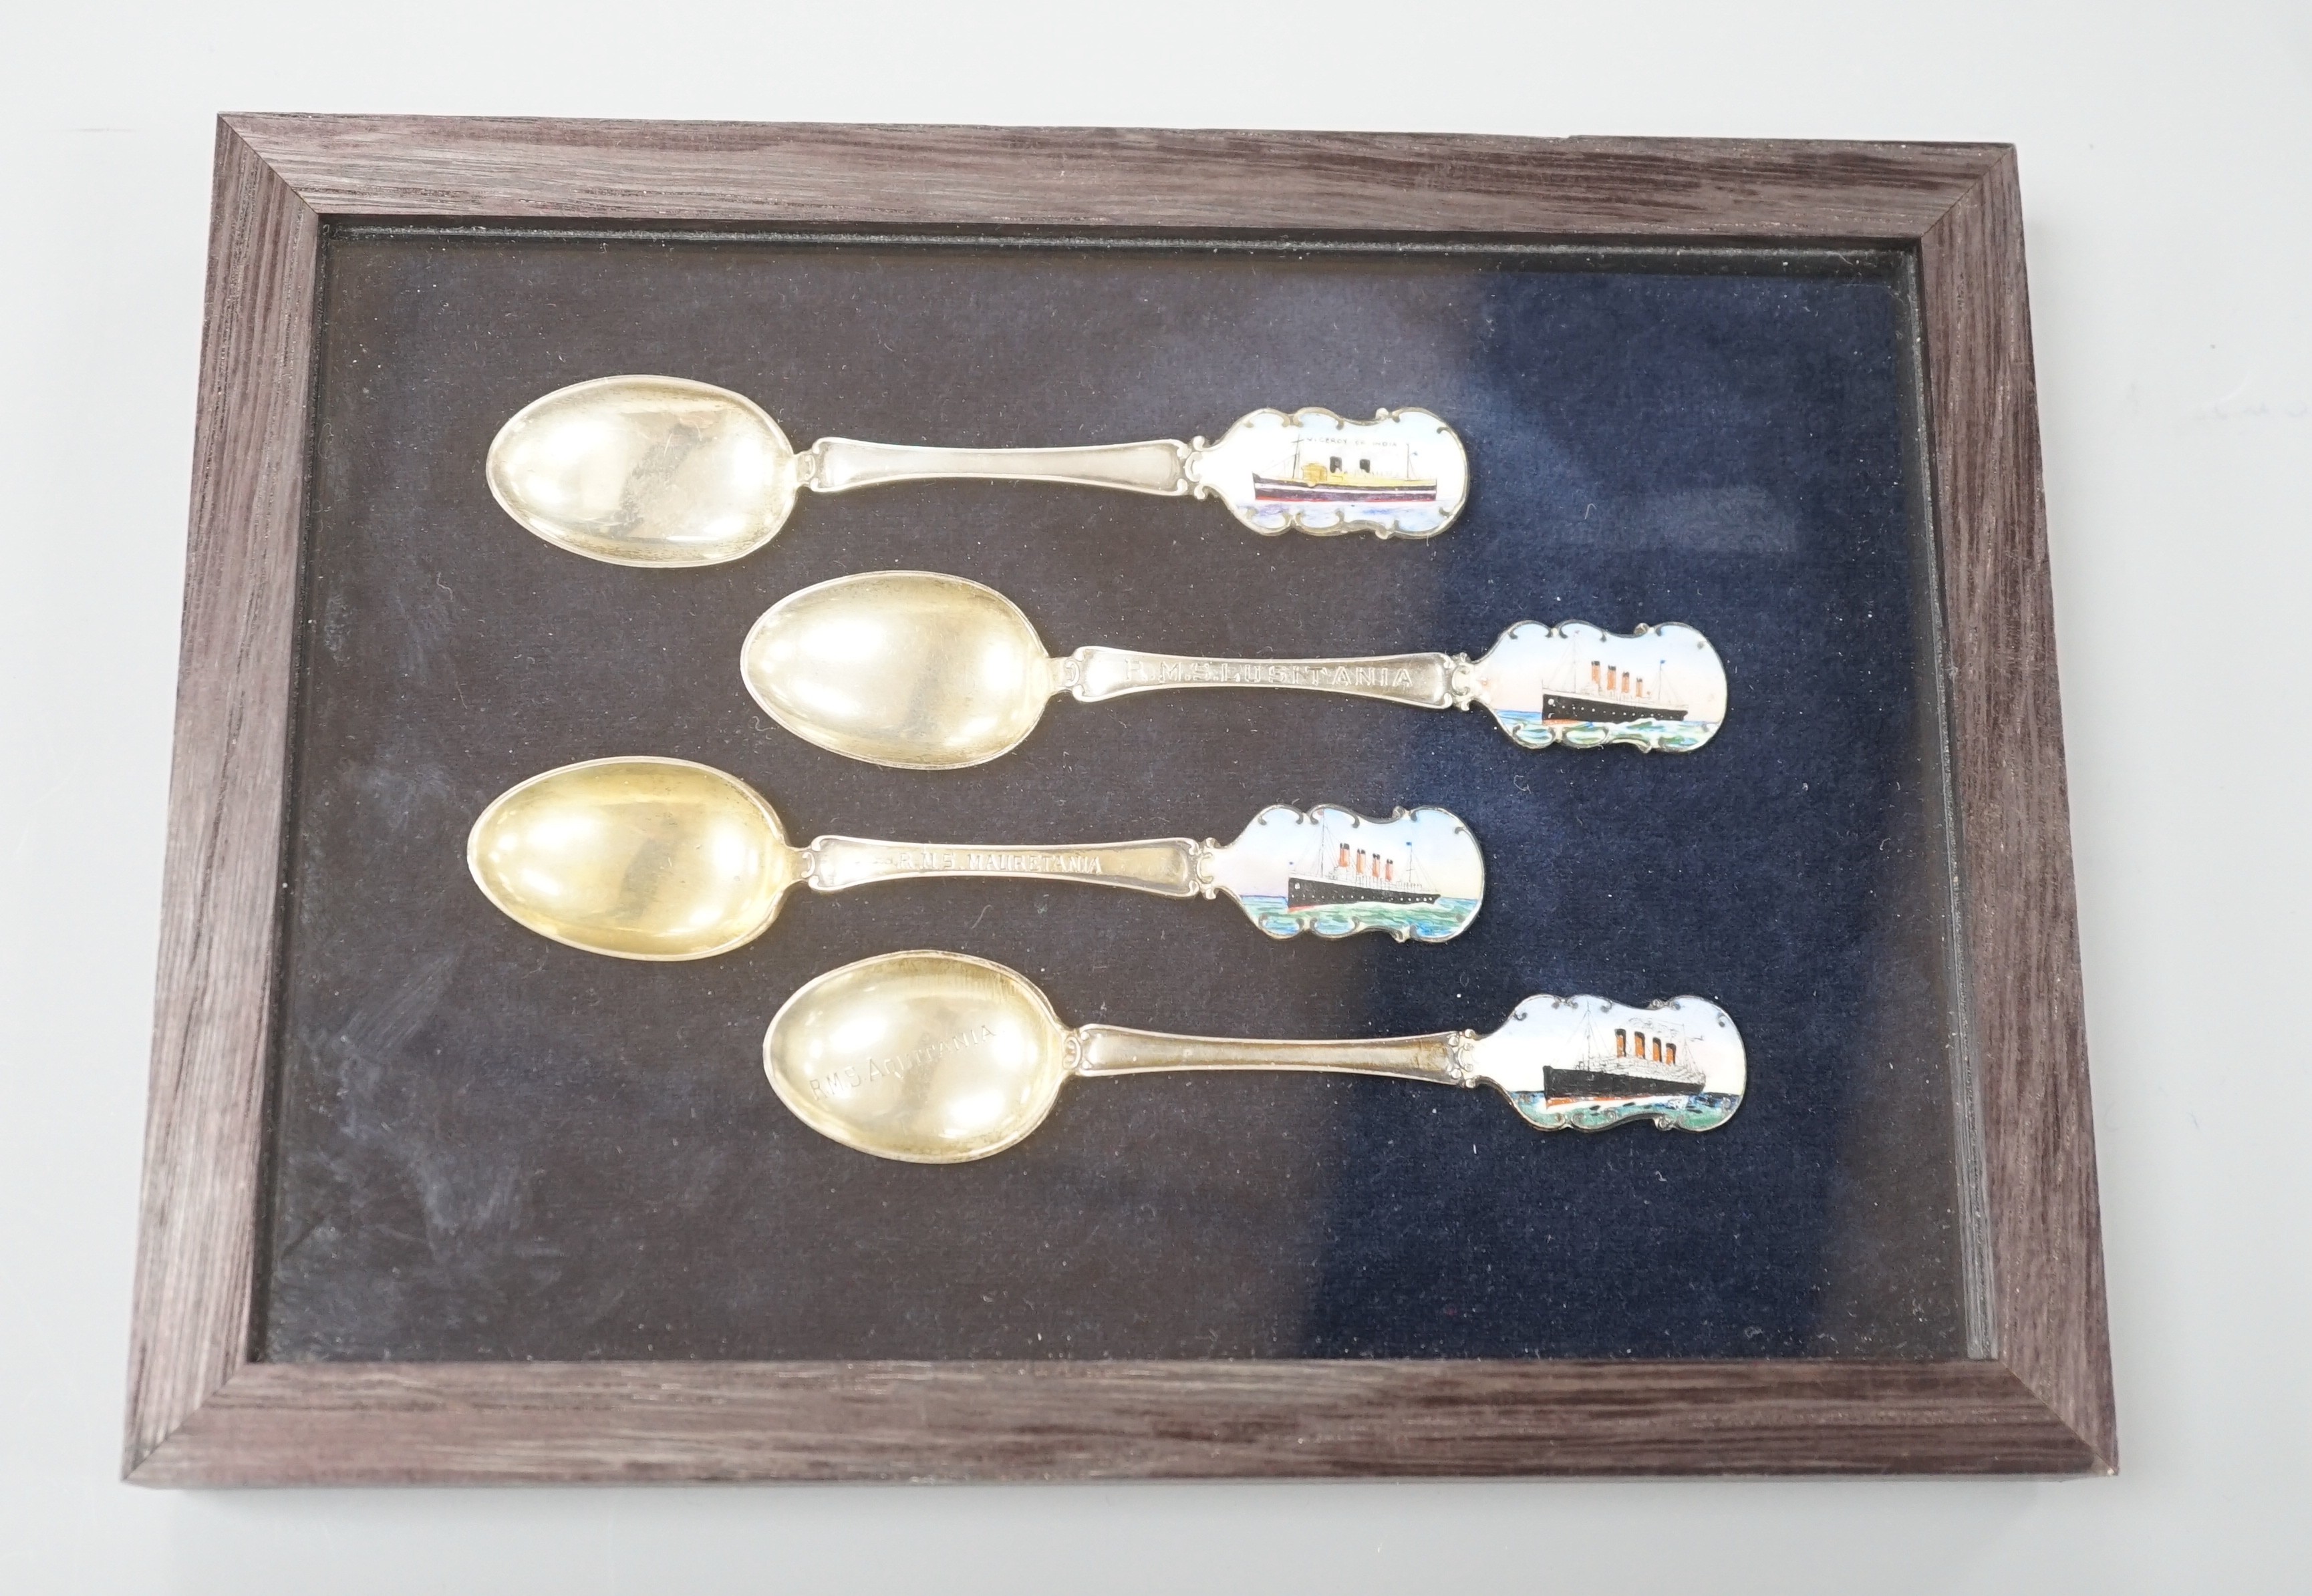 Cunard and P&O liners interest - four early 20th century silver and enamel souvenir spoons, inscribed RMS Lusitania, RMS Aquitania, RMS Mauretania and Viceroy of India, cased